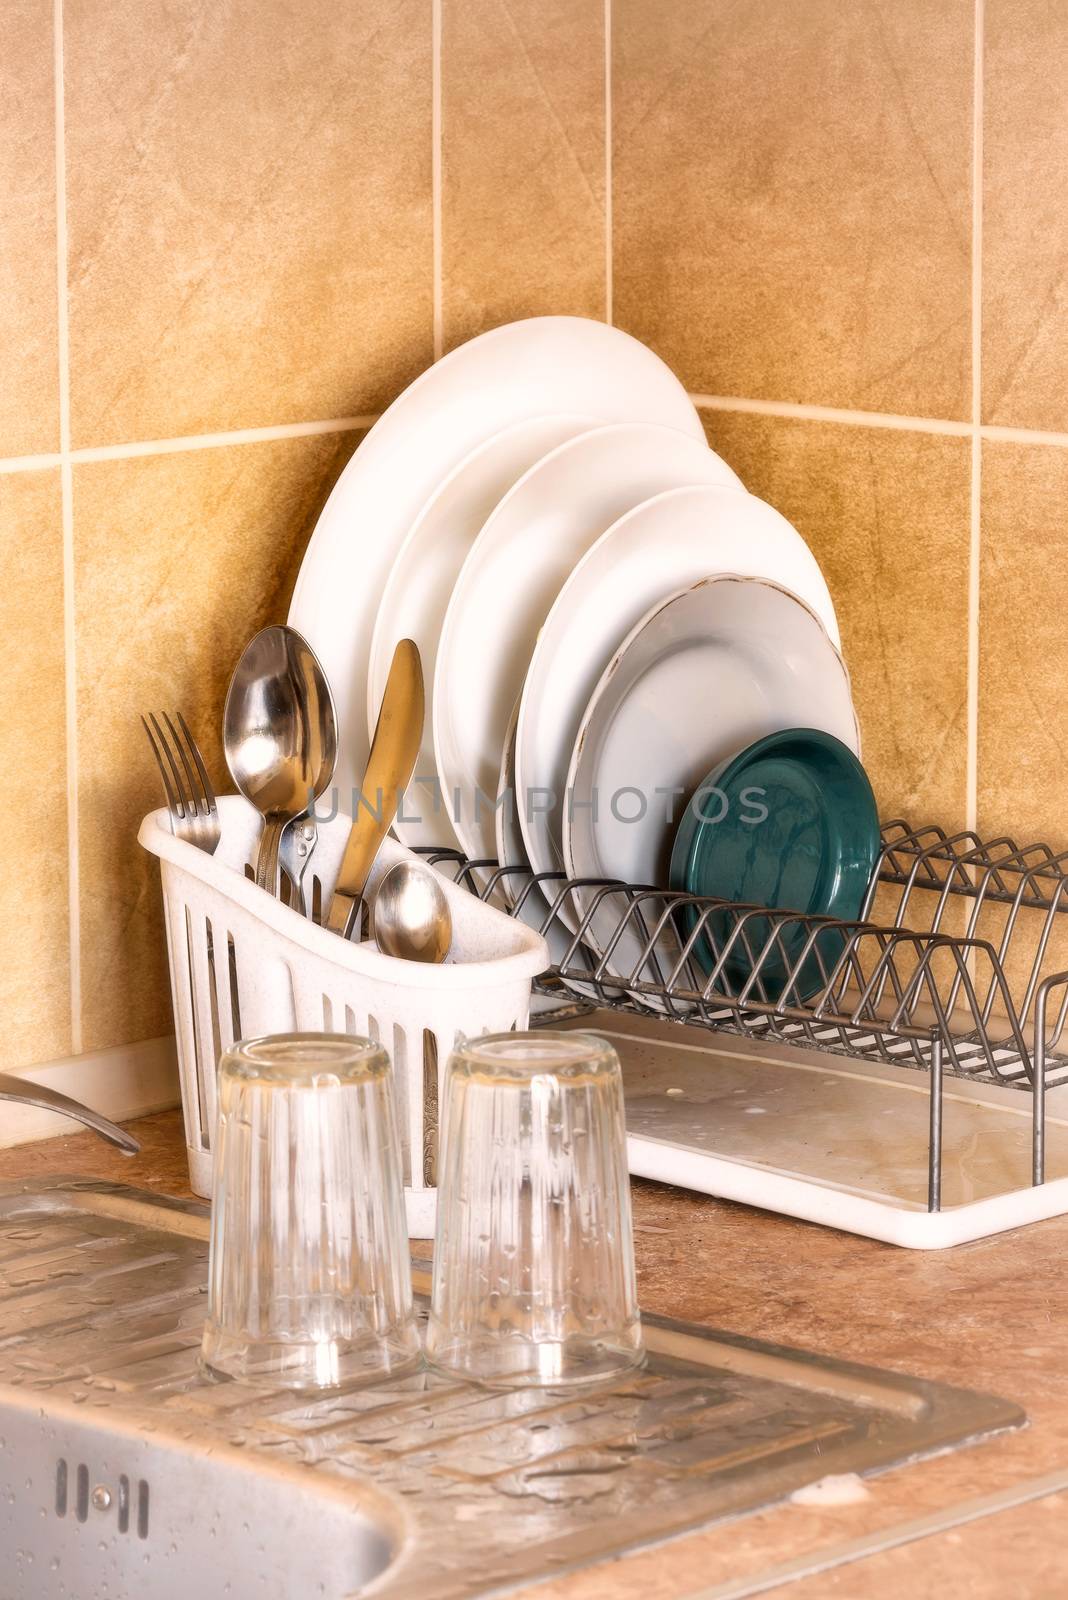 Washed plates, cutlery and glasses, drying in their racks close to the sink in the kitchen